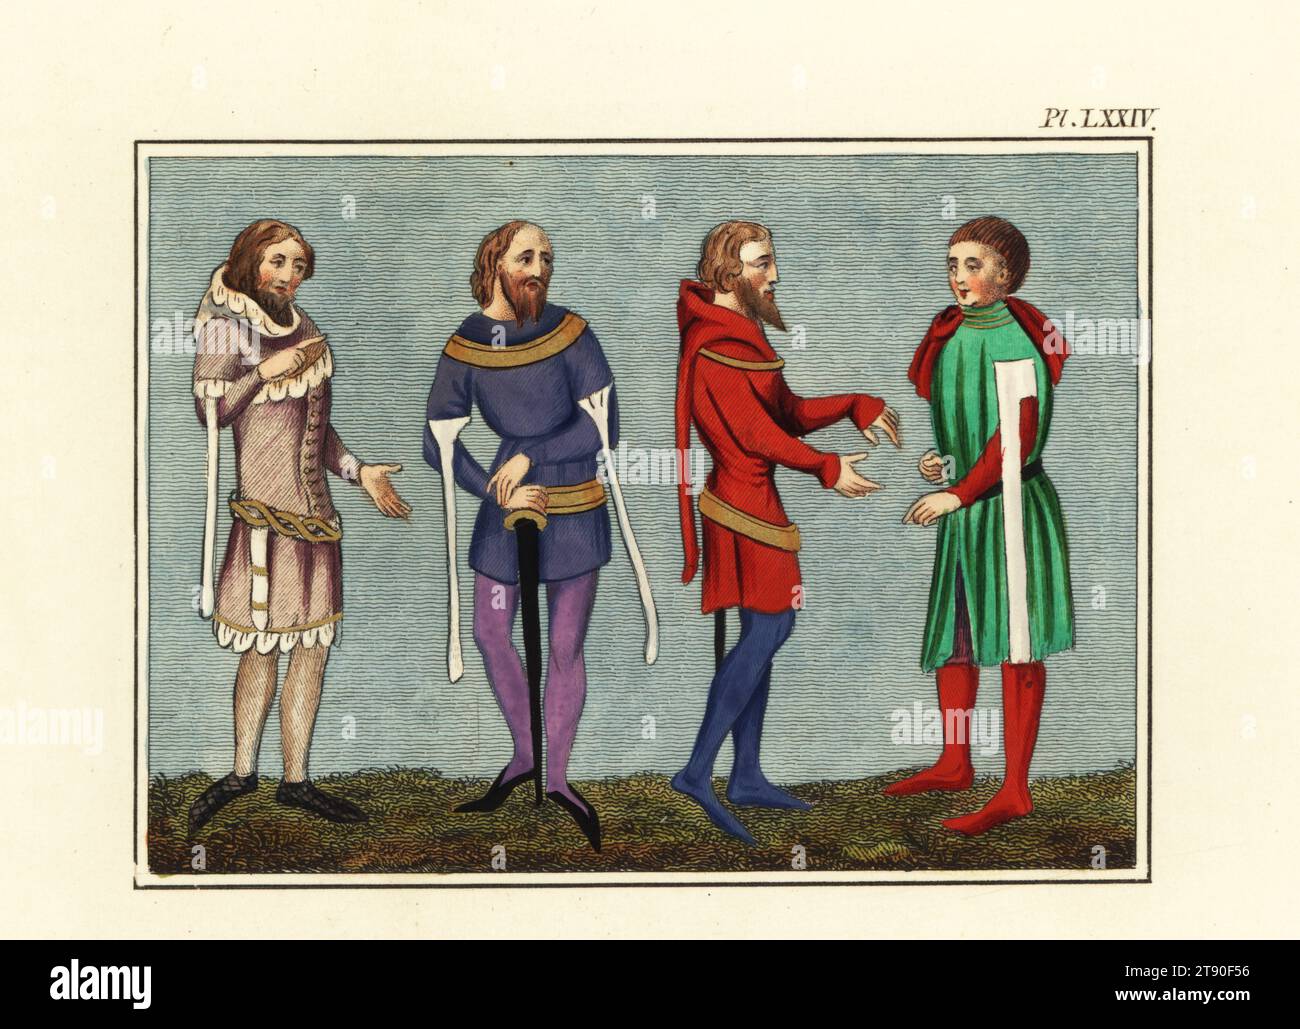 Gentlemen of the 14th century. Men in hooded doublets and hose. Handcoloured engraving by Joseph Strutt from his Complete View of the Dress and Habits of the People of England, Henry Bohn, London, 1842. Stock Photo